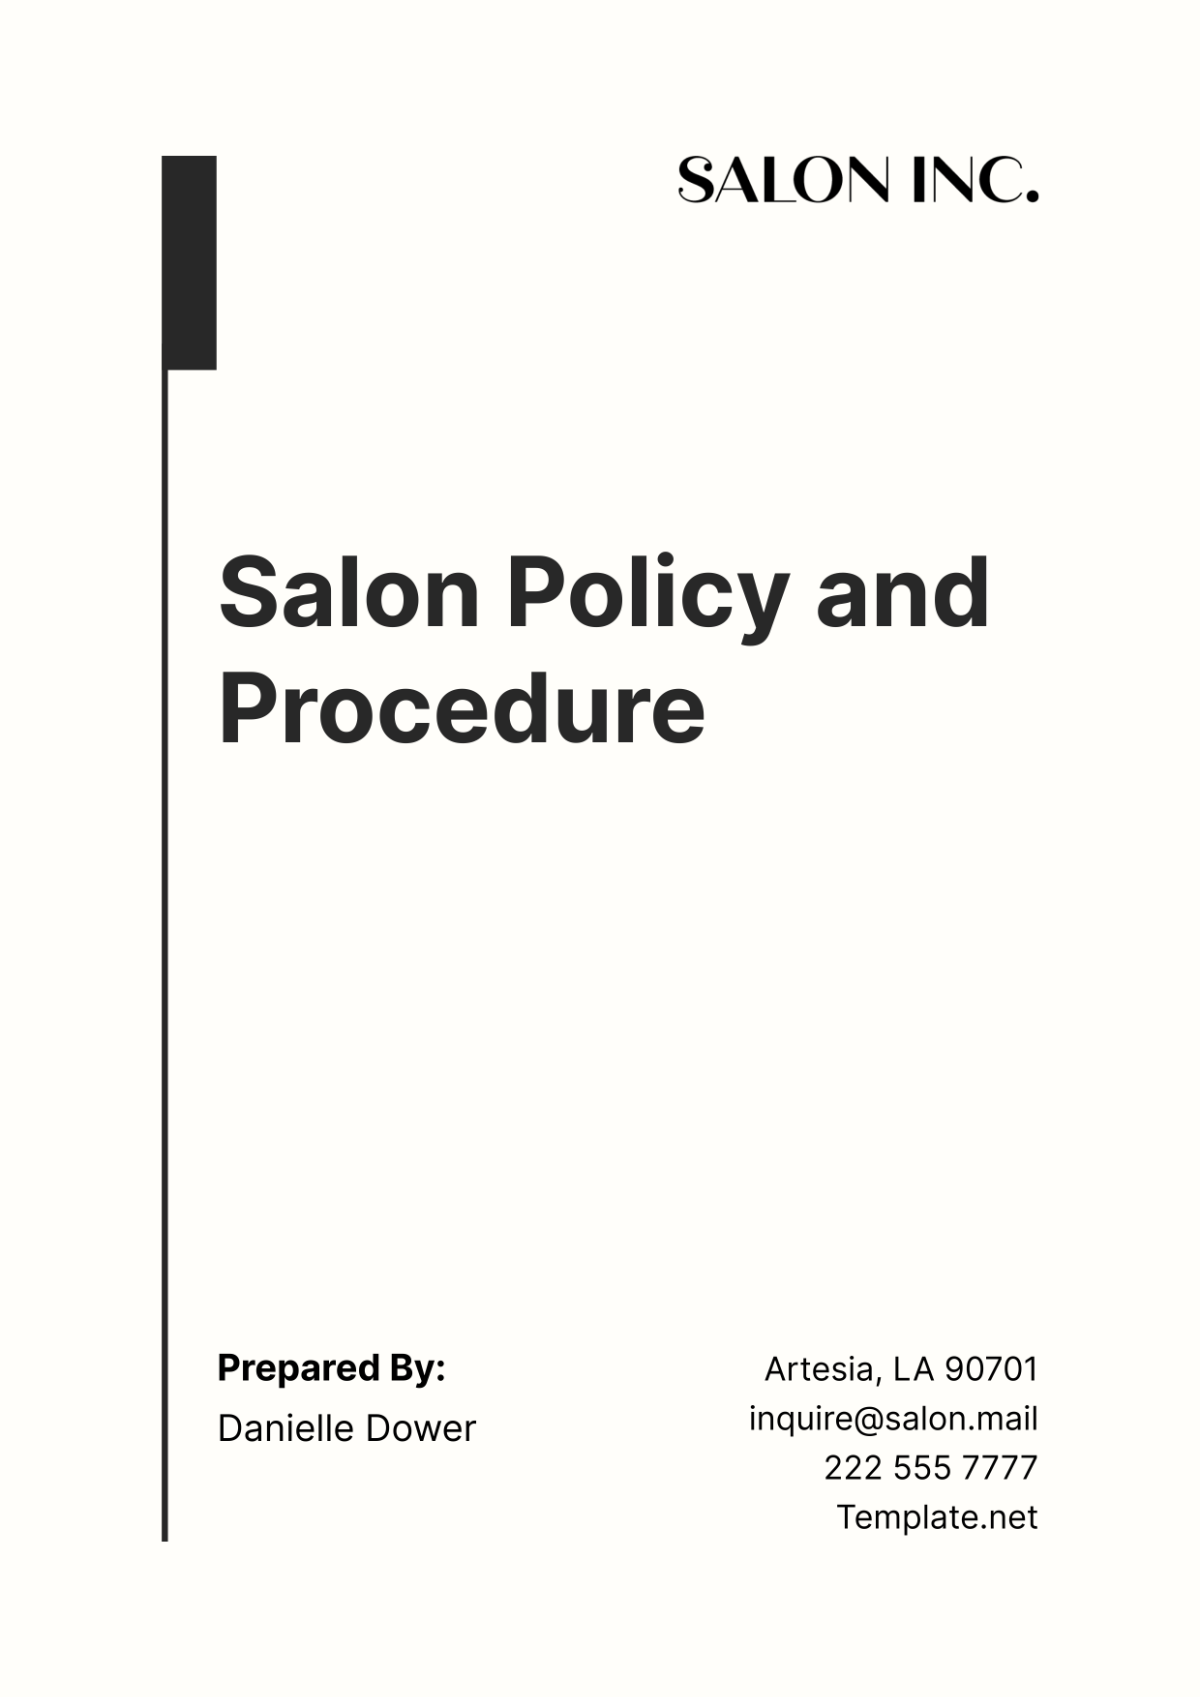 Salon Policy and Procedure Template